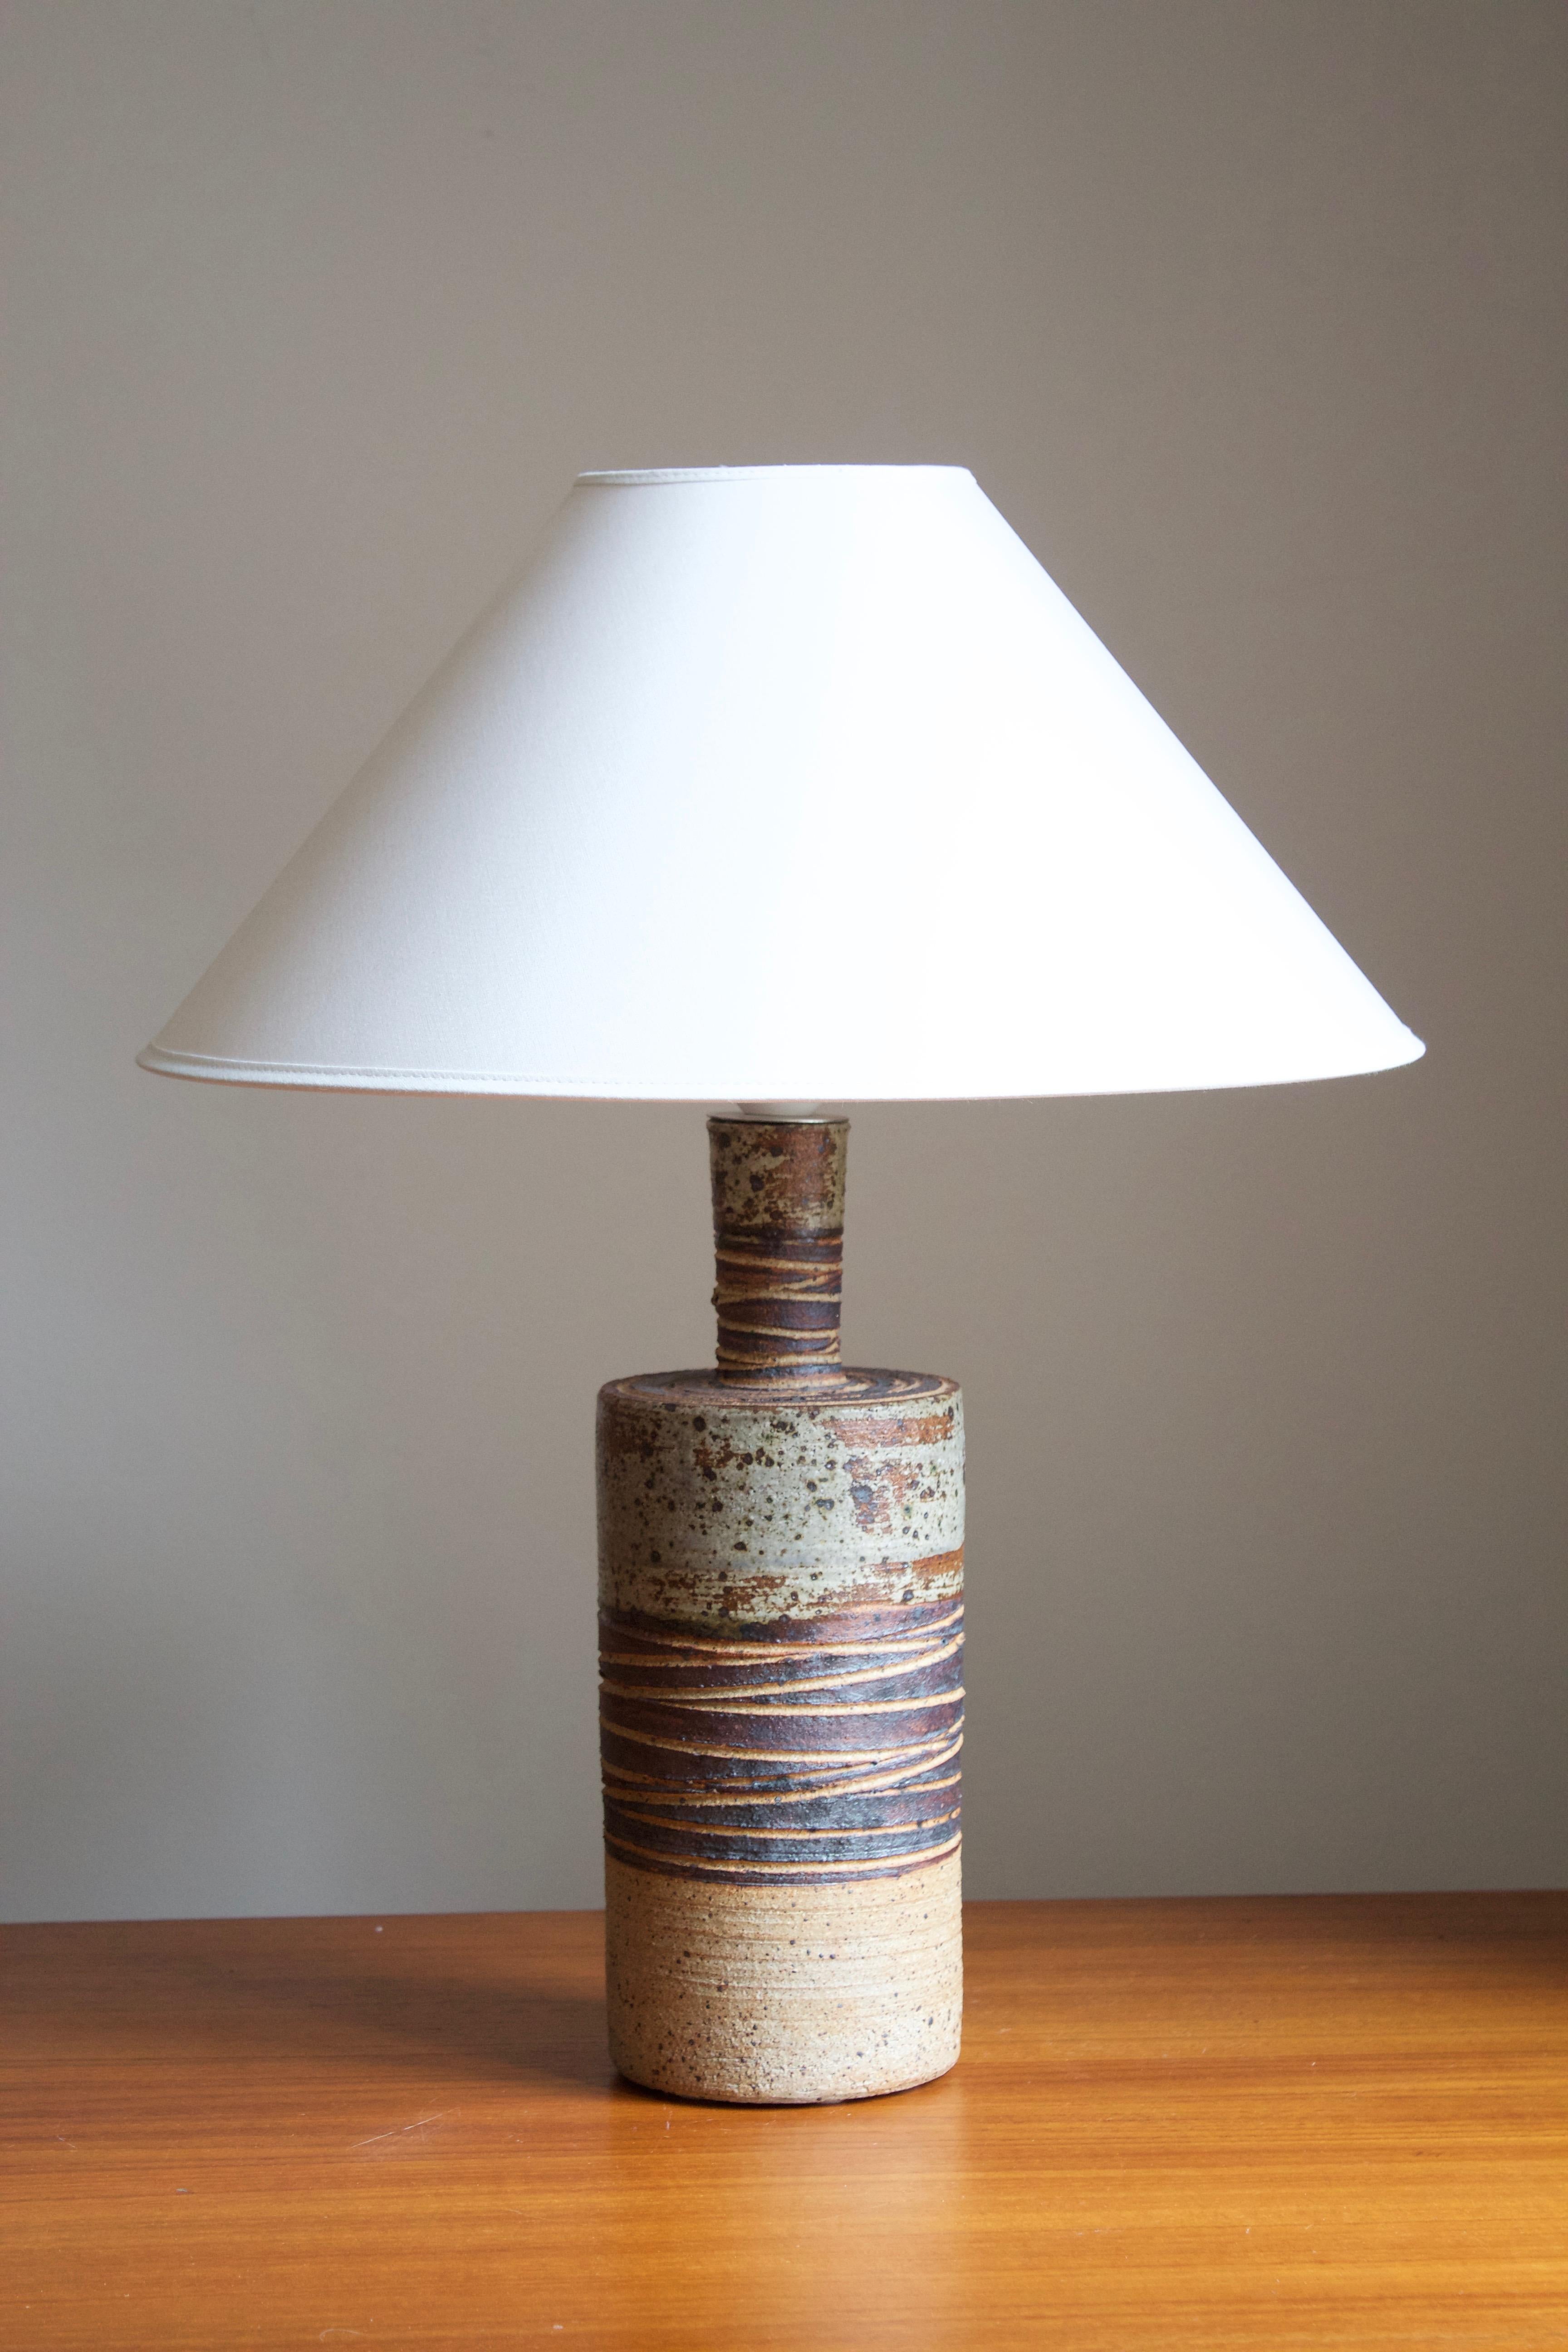 A sizable table lamp. Produced and designed by Tue Poulsen, Denmark, 1960s. Underside of base stamped.

Sold without lampshade. Stated dimensions exclude lampshade. 

Glaze features brown-beige-green colors.

Other designers of the period include